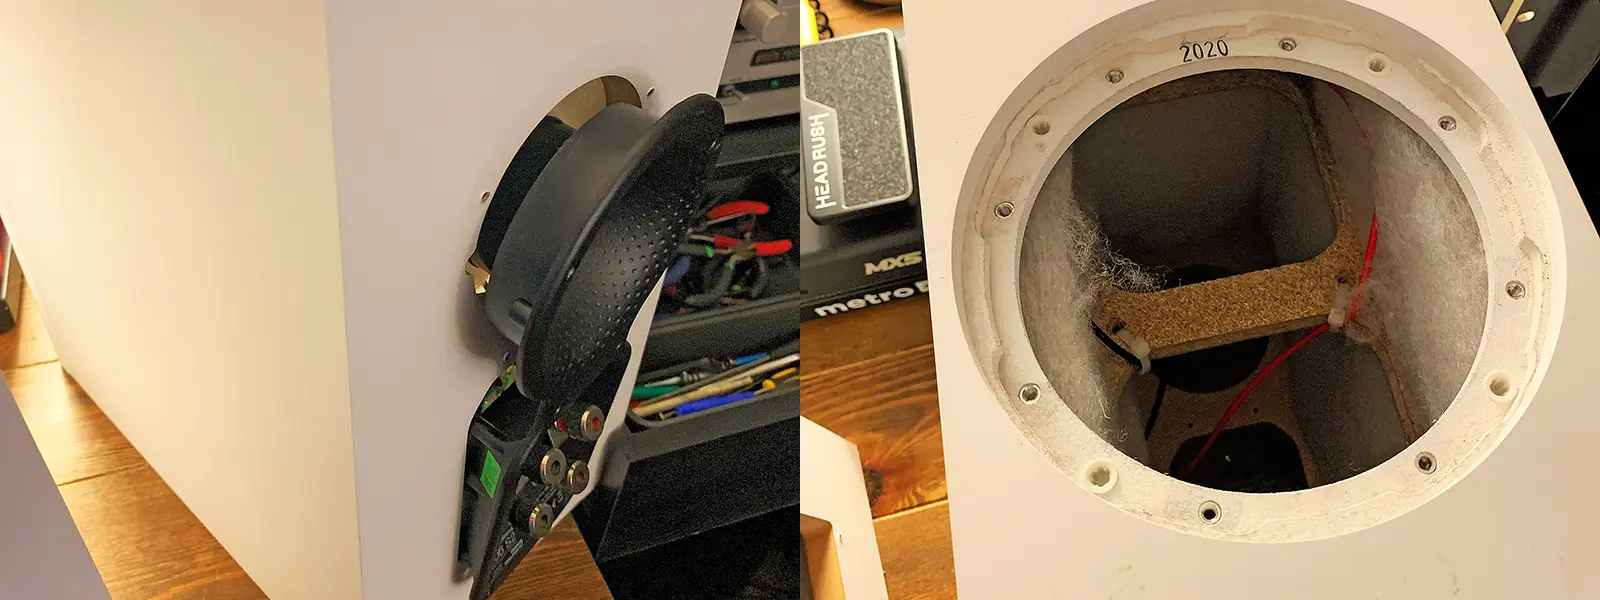 Upgrading Bowers & Wilkins 606 Anniversary Edition Speakers With GR-Research Crossover | SeanRose.com